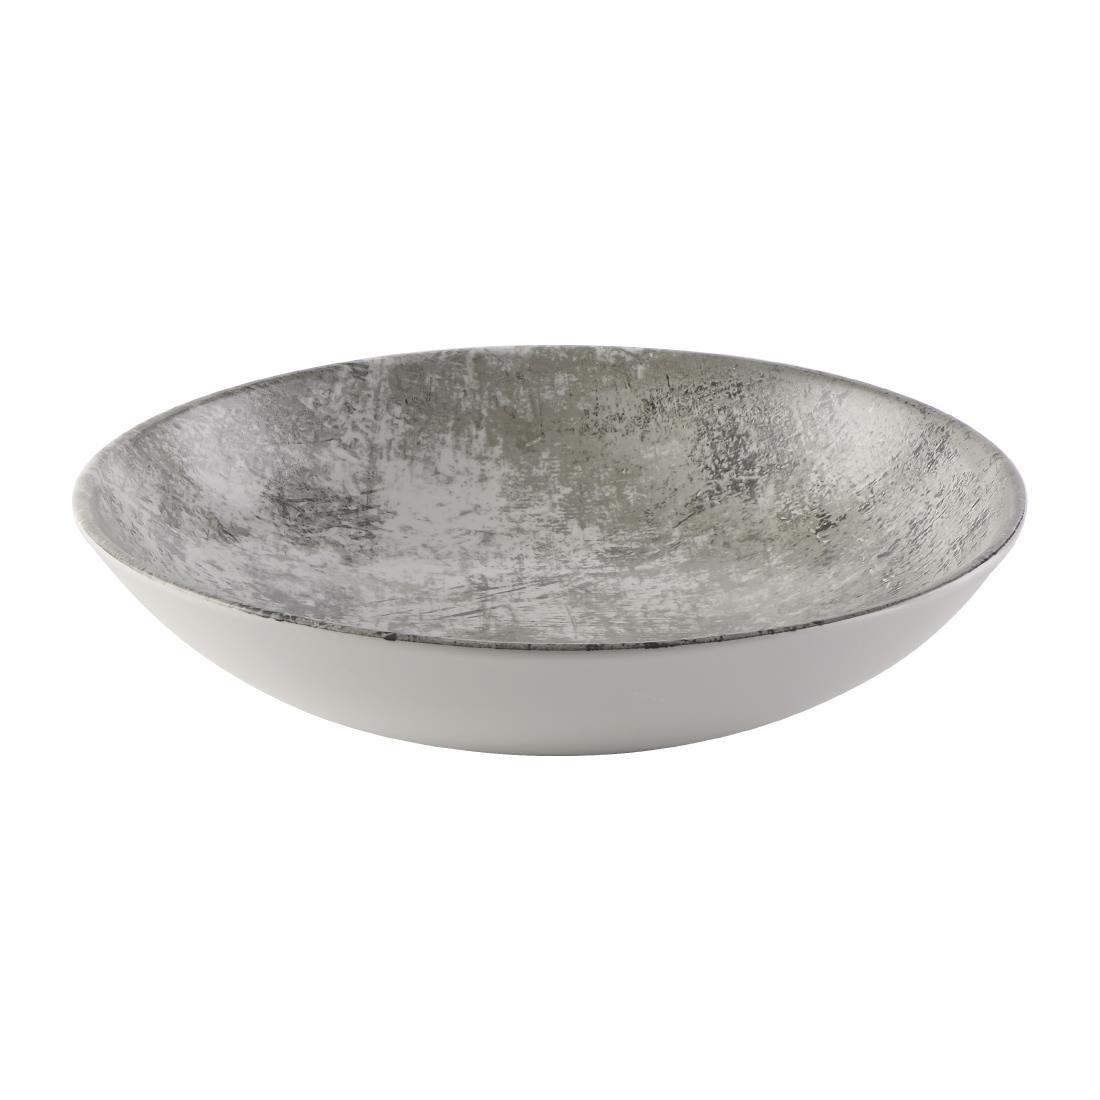 Dudson Makers Urban Coupe Bowl Grey 248mm (Pack of 12) - FS830  - 1